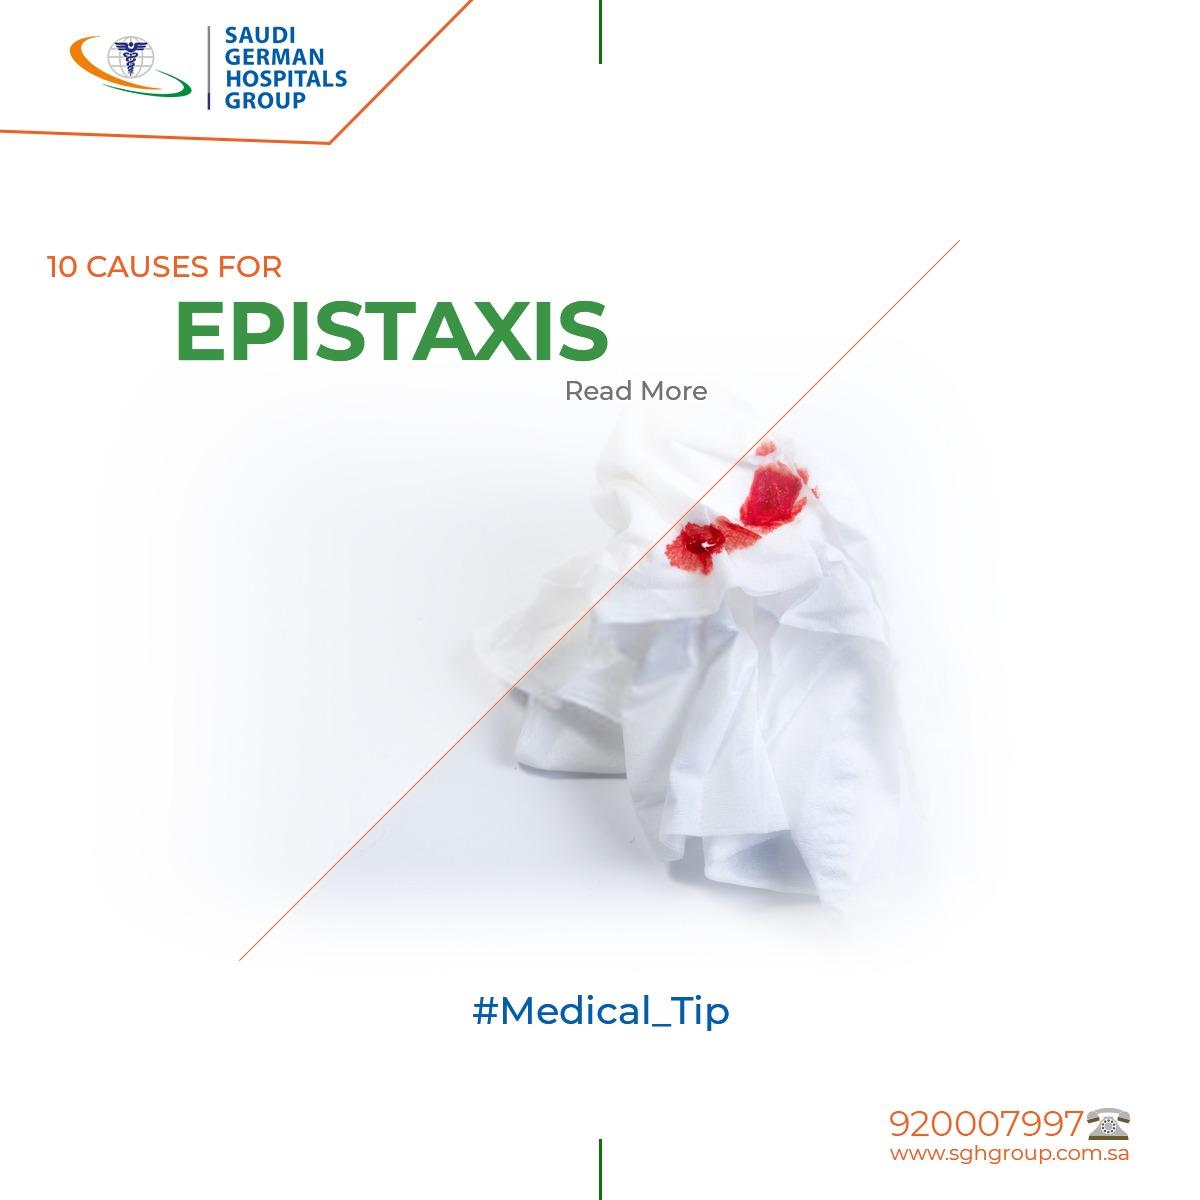 10 Causes for epistaxis